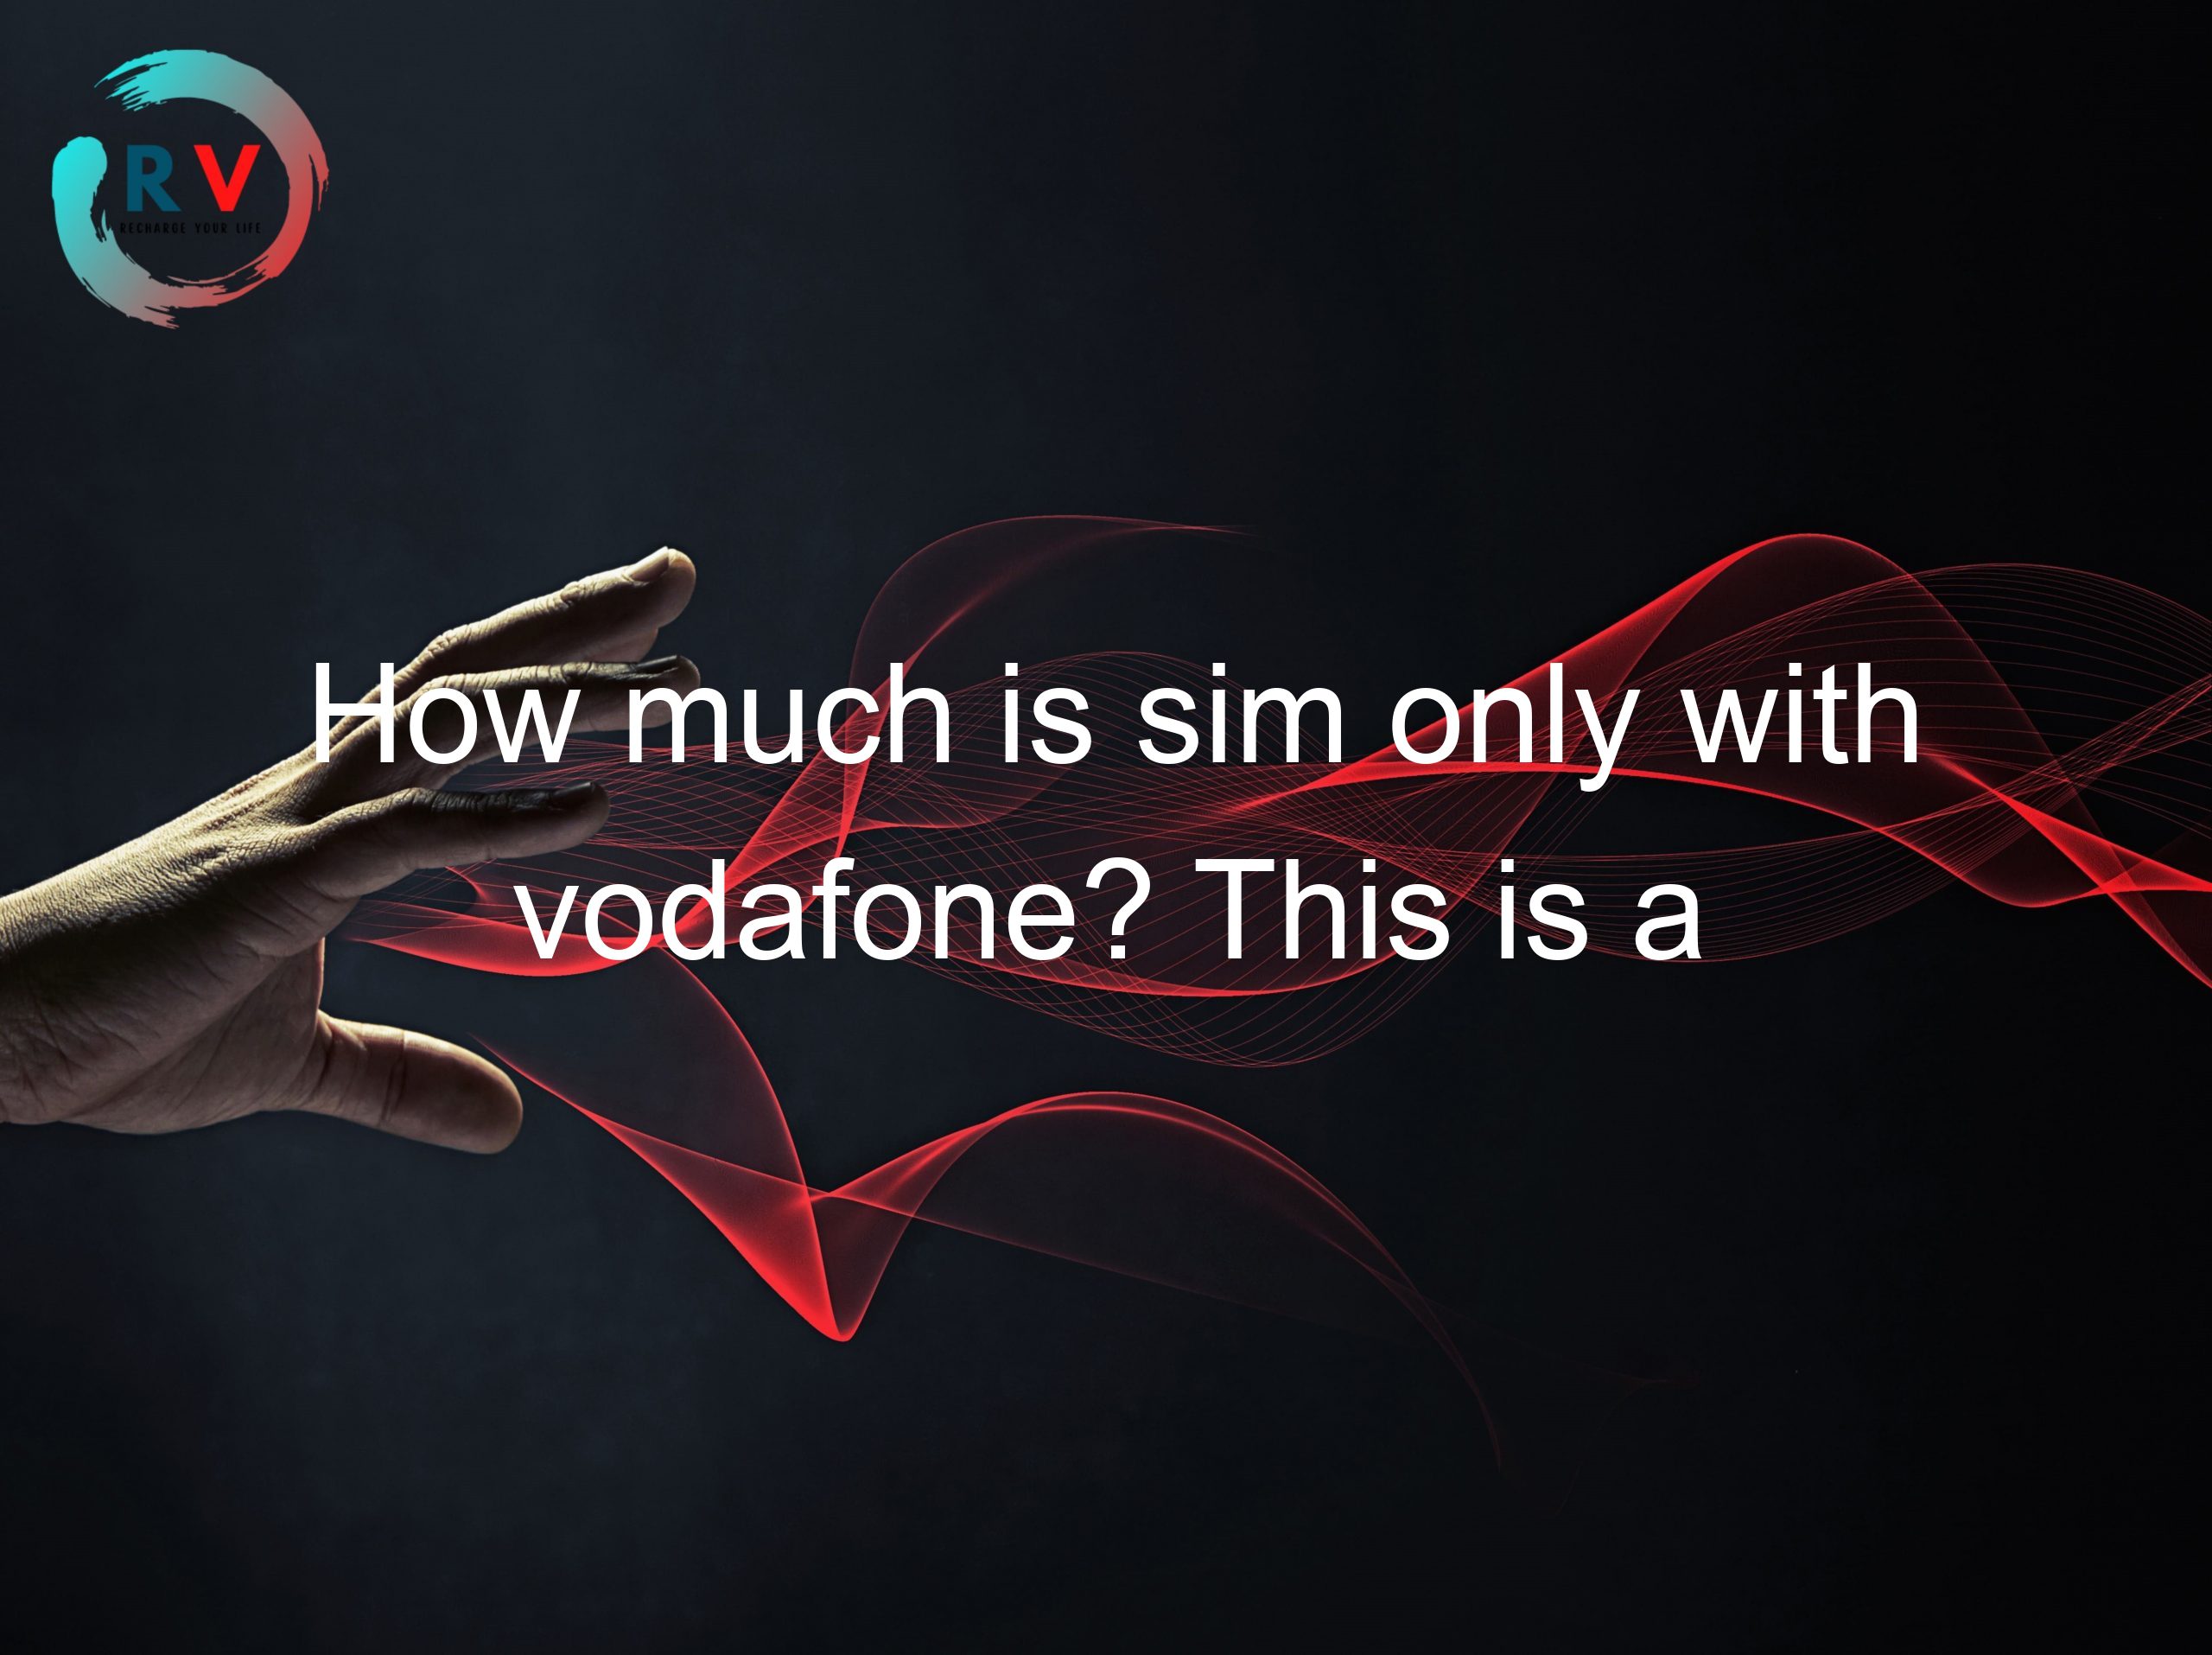 How much is sim only with vodafone? This is a question that many people have